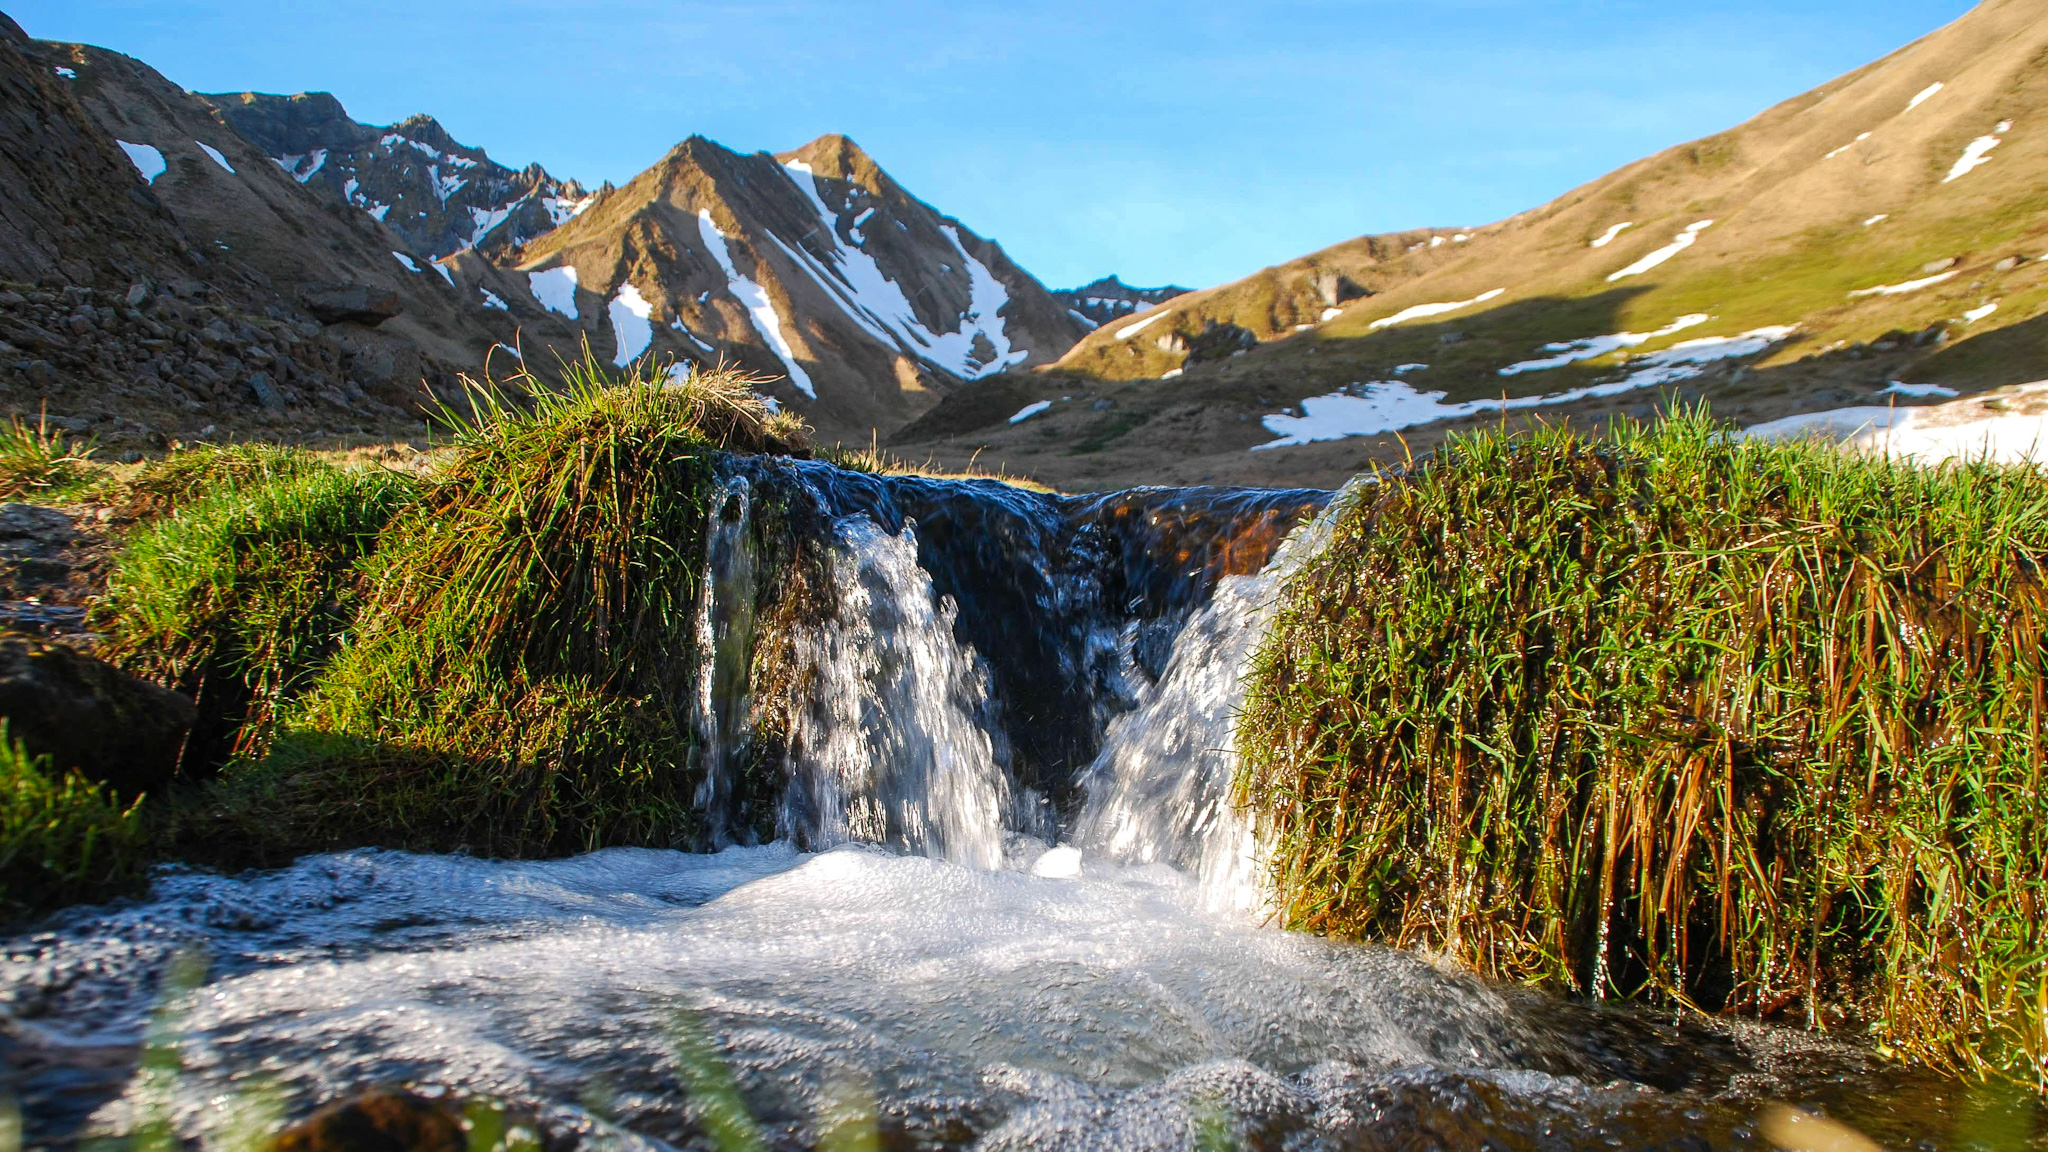 The Val de Courre at the melting snow in the Massif du Sancy